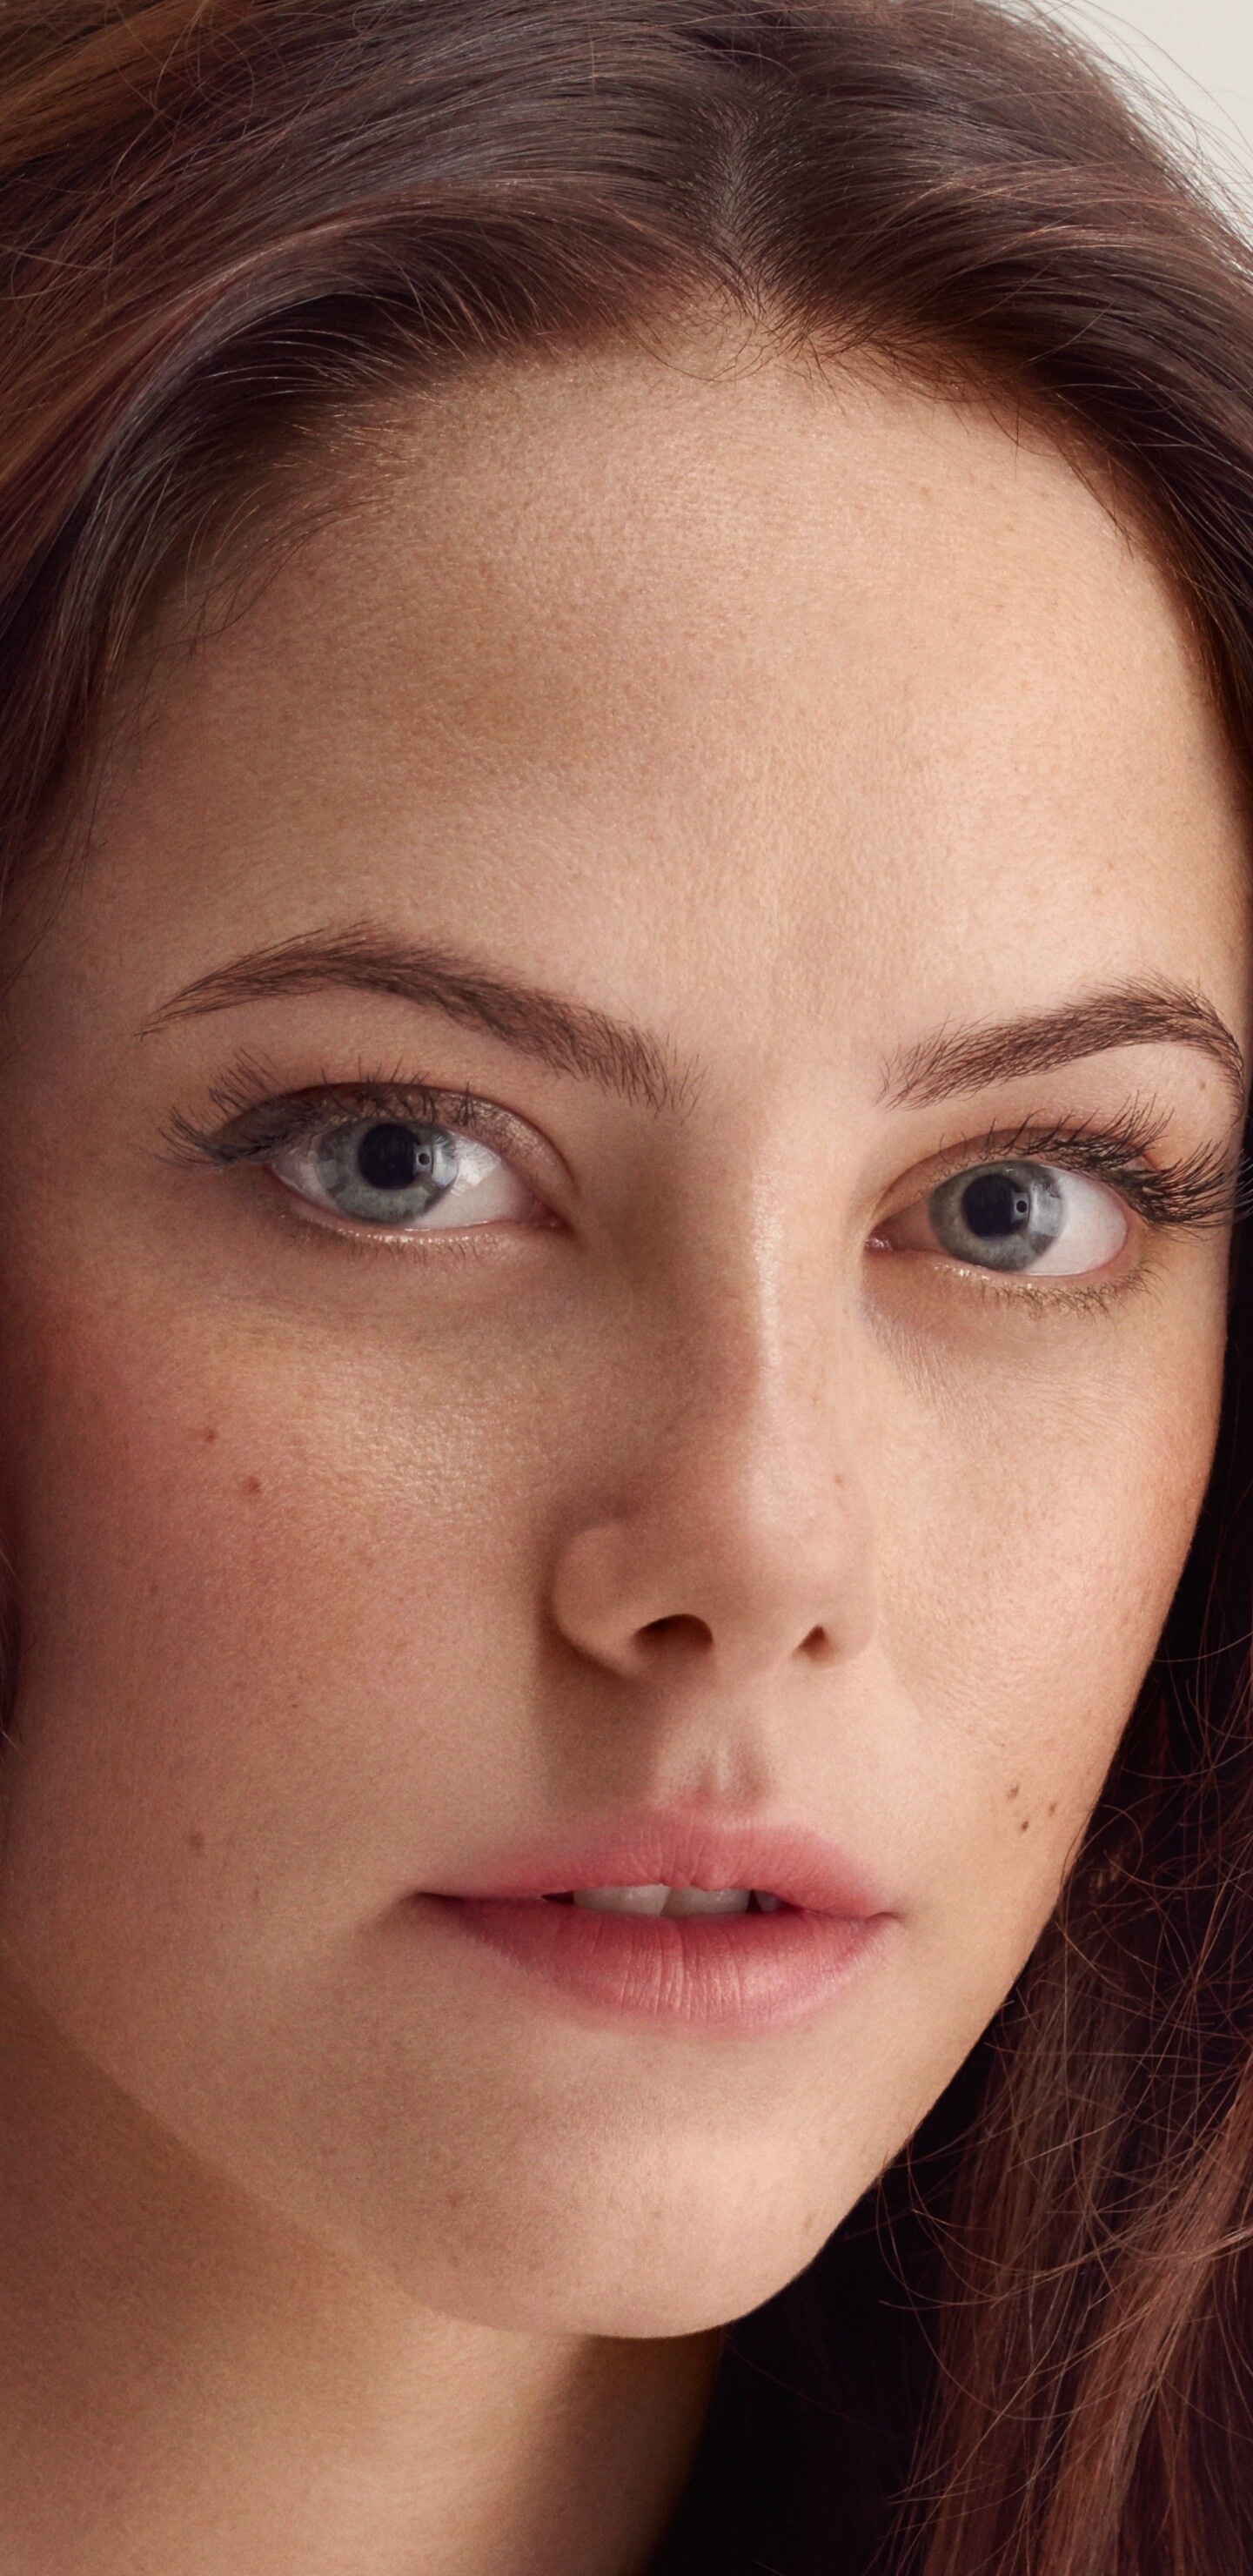 Kaya Scodelario: Appeared in the 2010 remake of Clash of the Titans as Peshet. 1440x2960 HD Background.